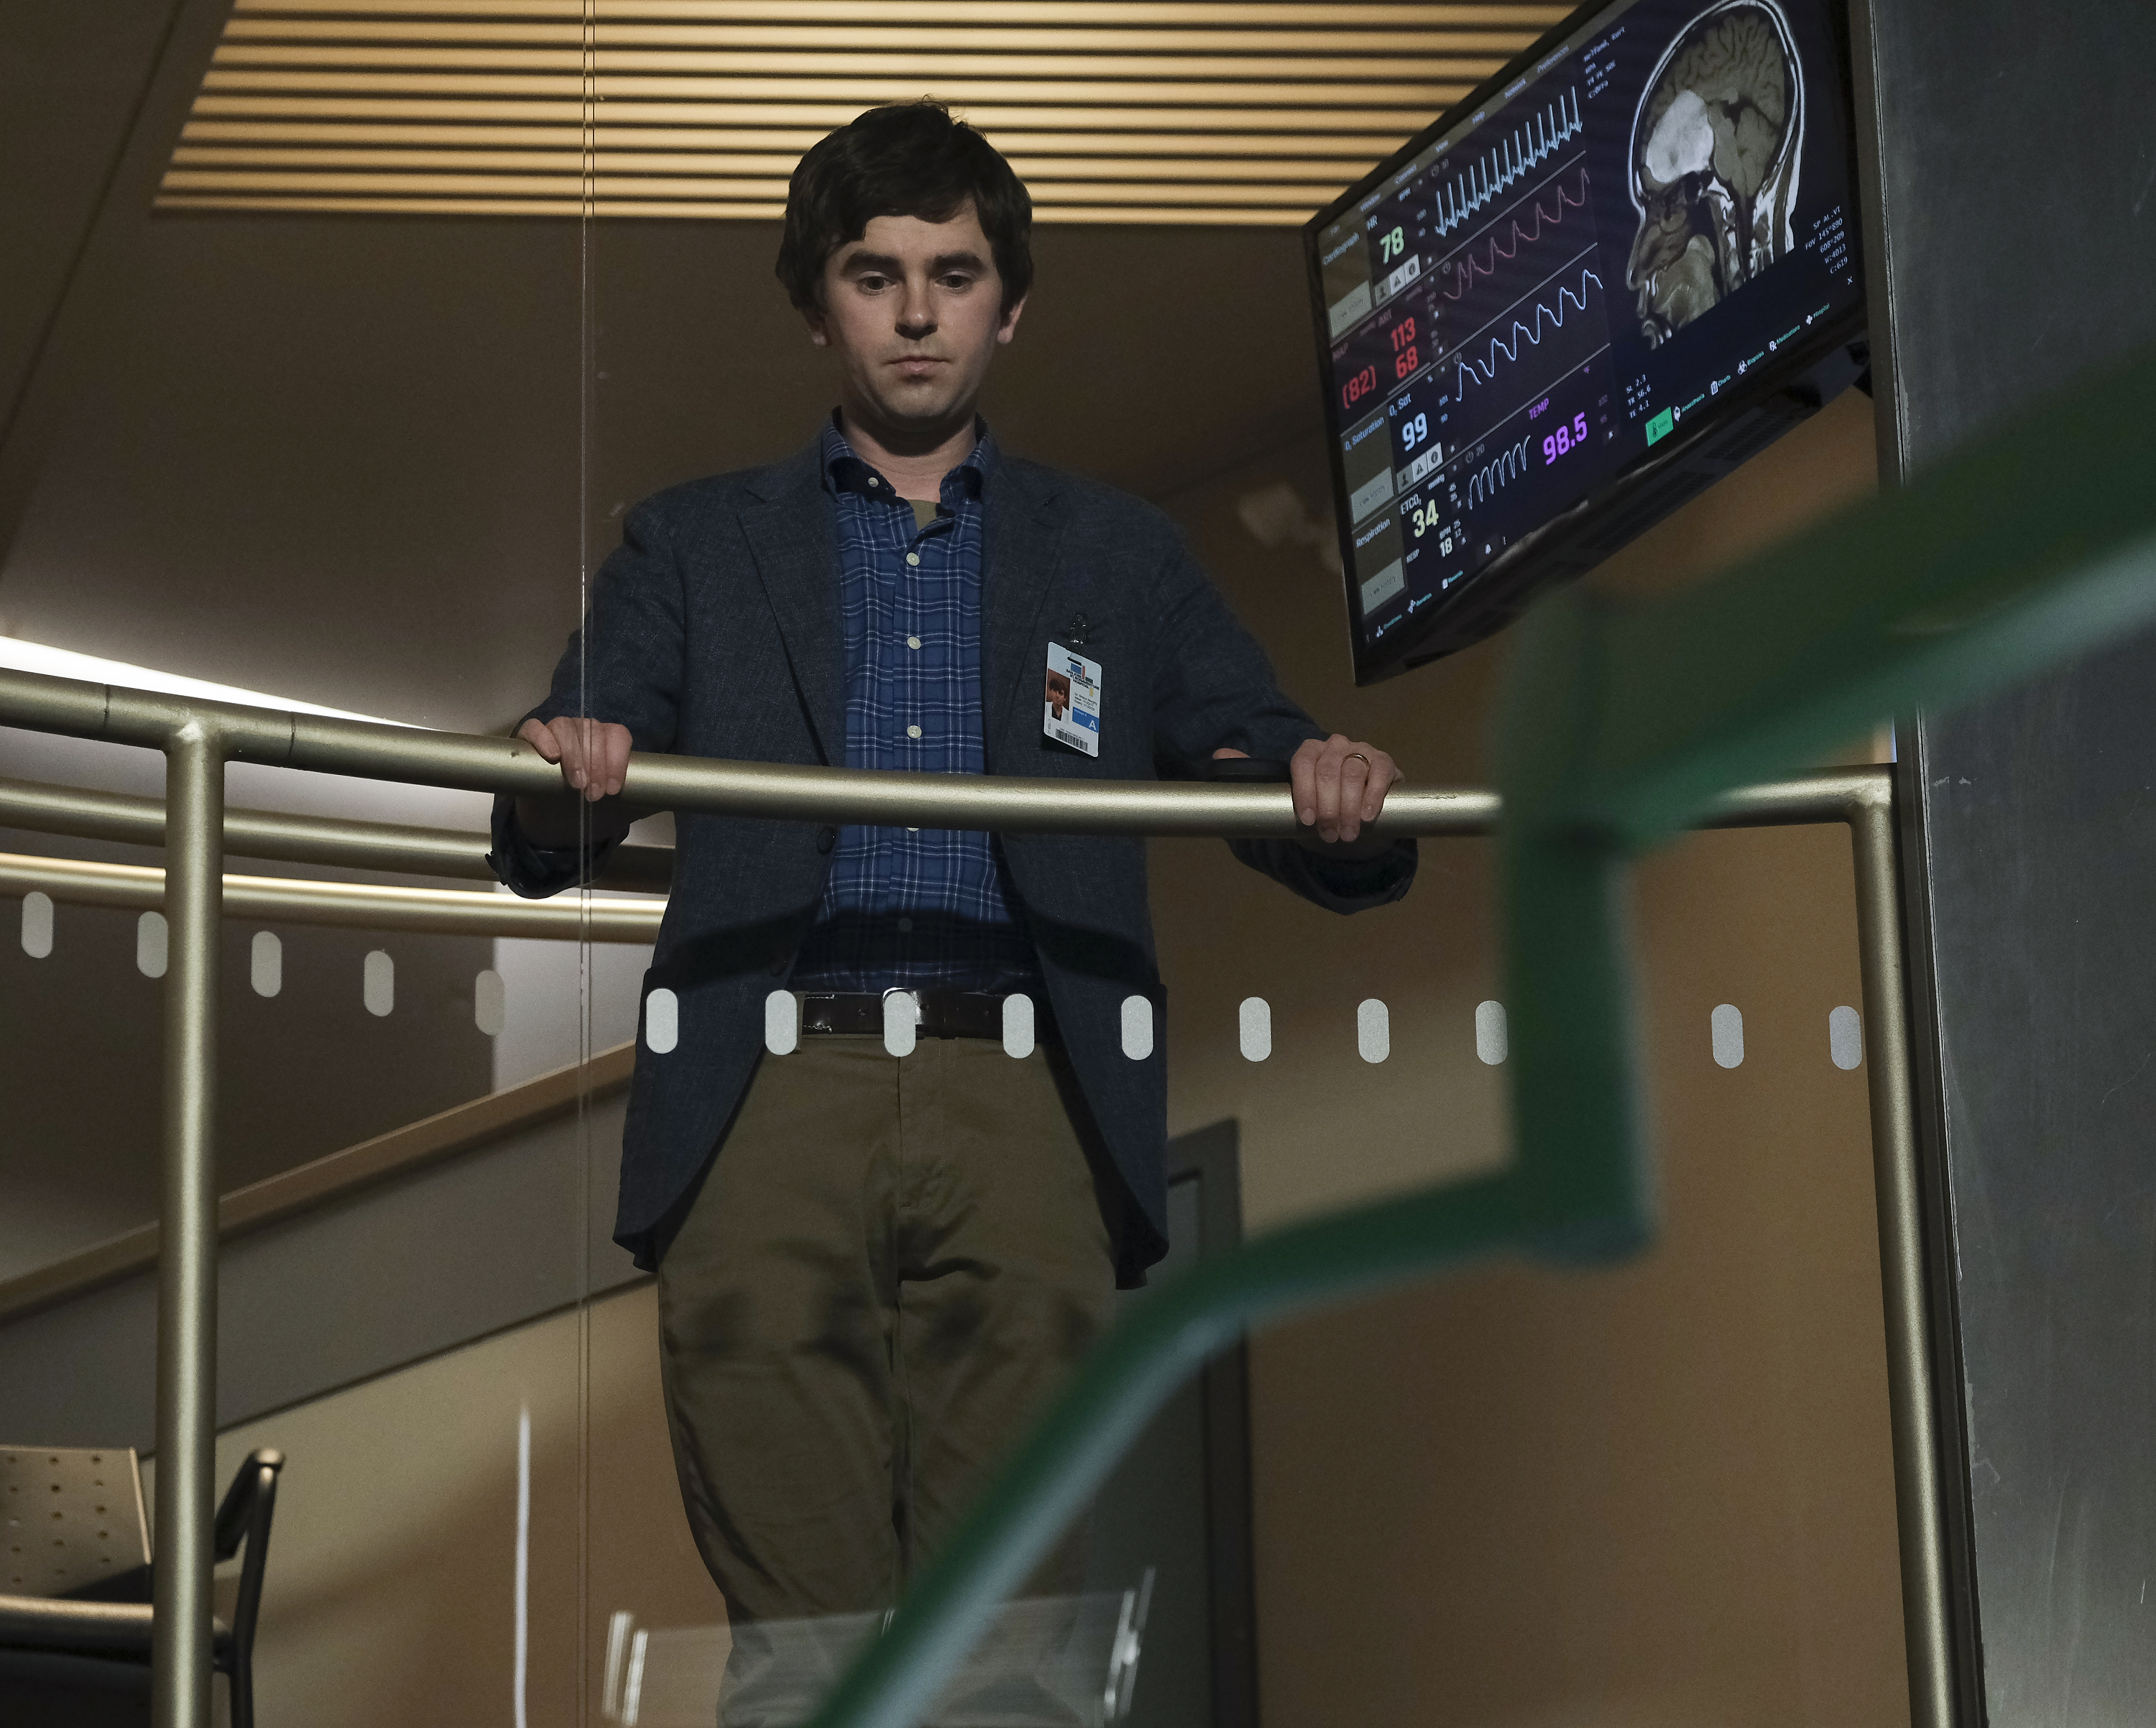 Freddie Highmore in his role as Dr. Shaun Murphy on the television show The Good Doctor